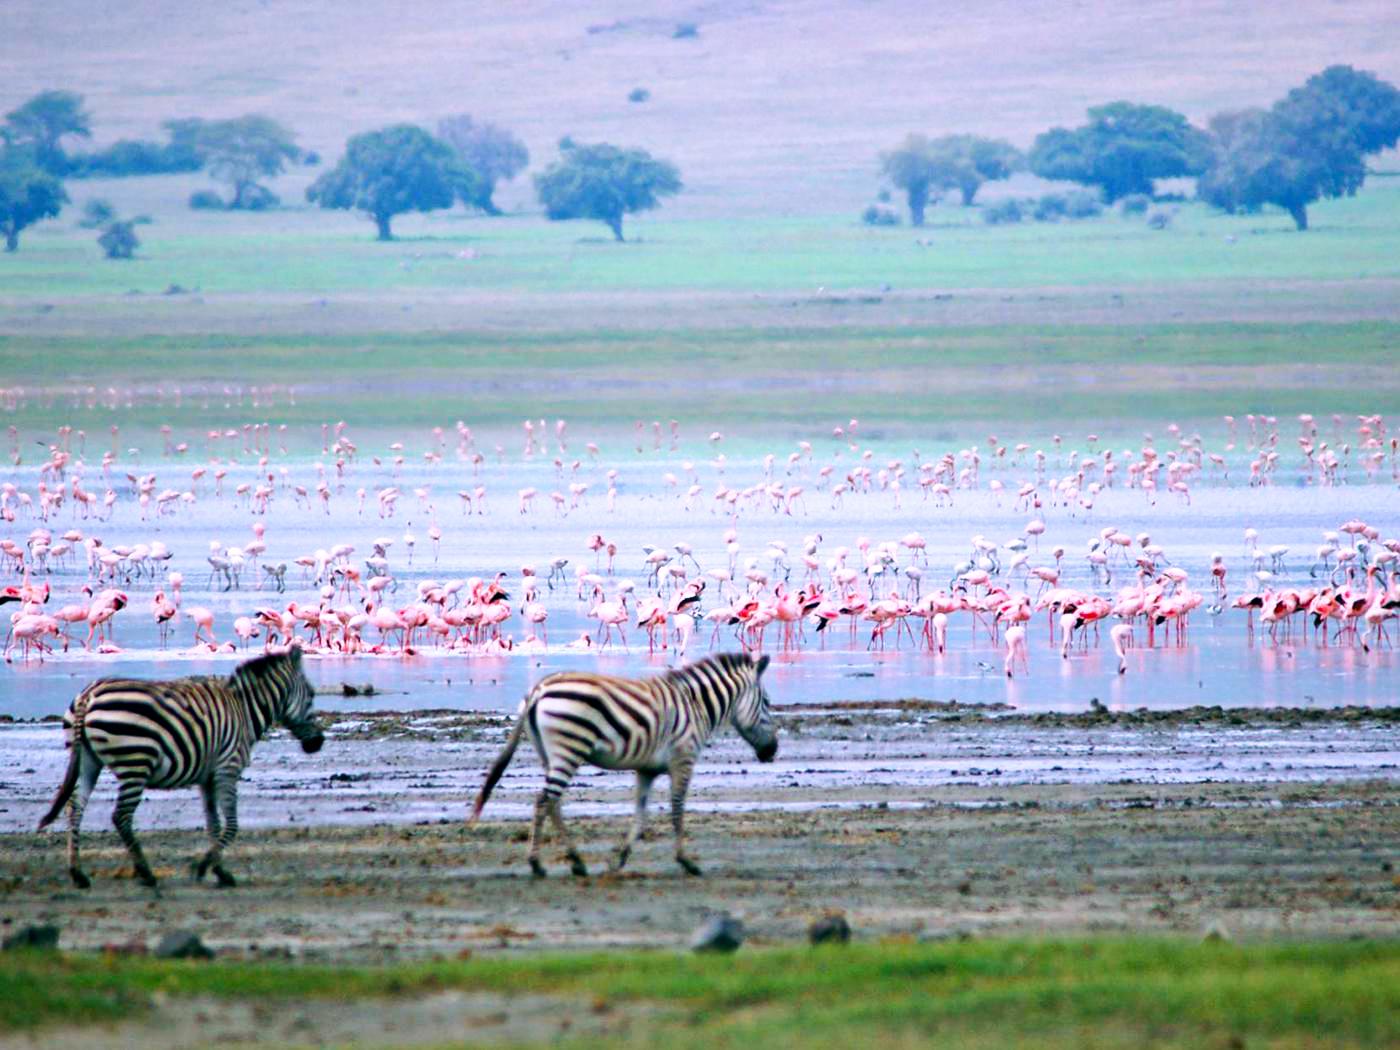 You are currently viewing Lake Manyara National Park